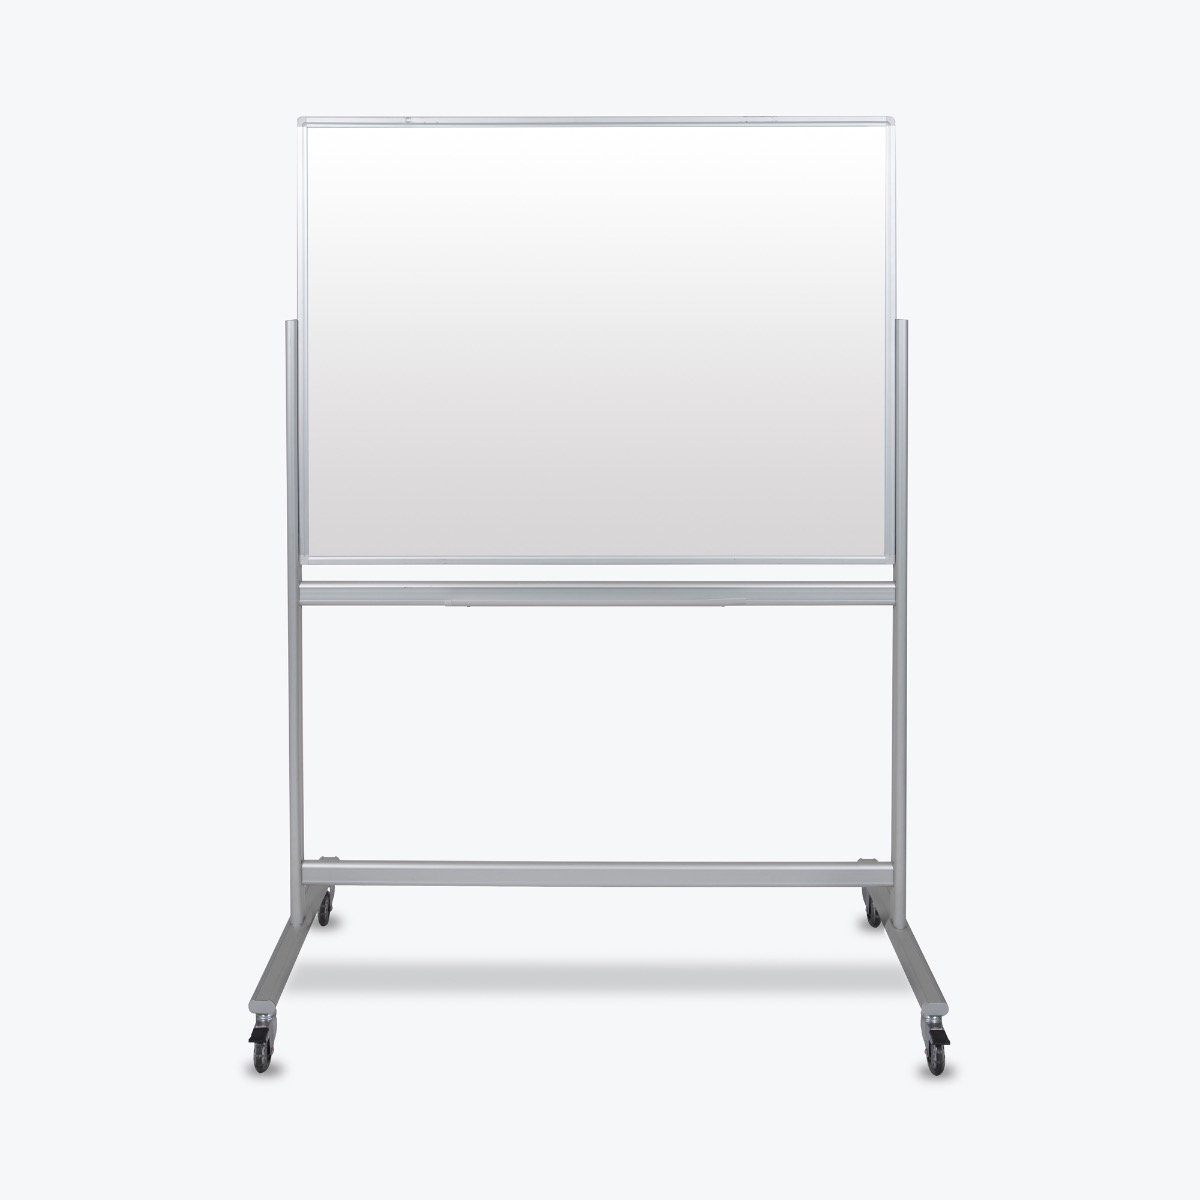 UPC 847210037200 product image for MMGB4836 Double-Sided Mobile Magnetic Glass Marker Board - 48 x 36 in. | upcitemdb.com